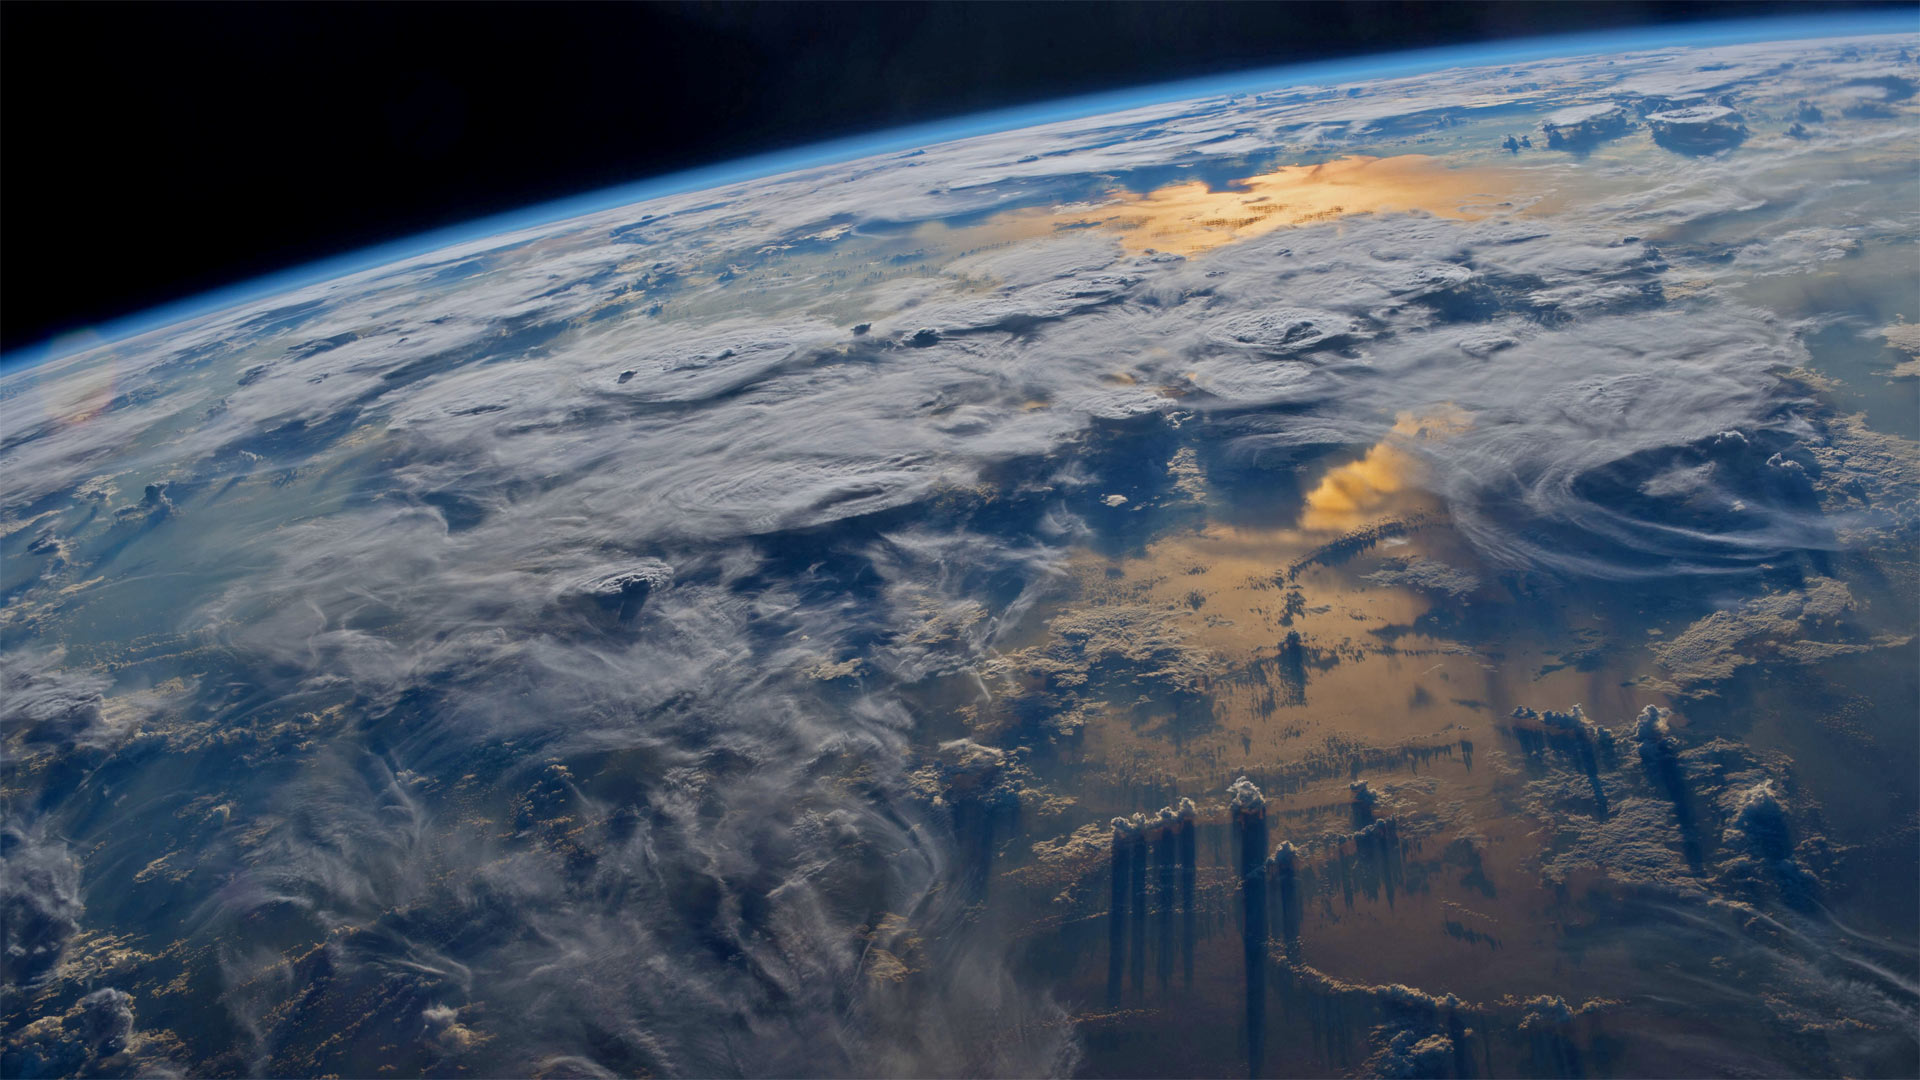 Earth viewed from the International Space Station, photographed by astronaut Jeff Williams - Jeff Williams/NASA)